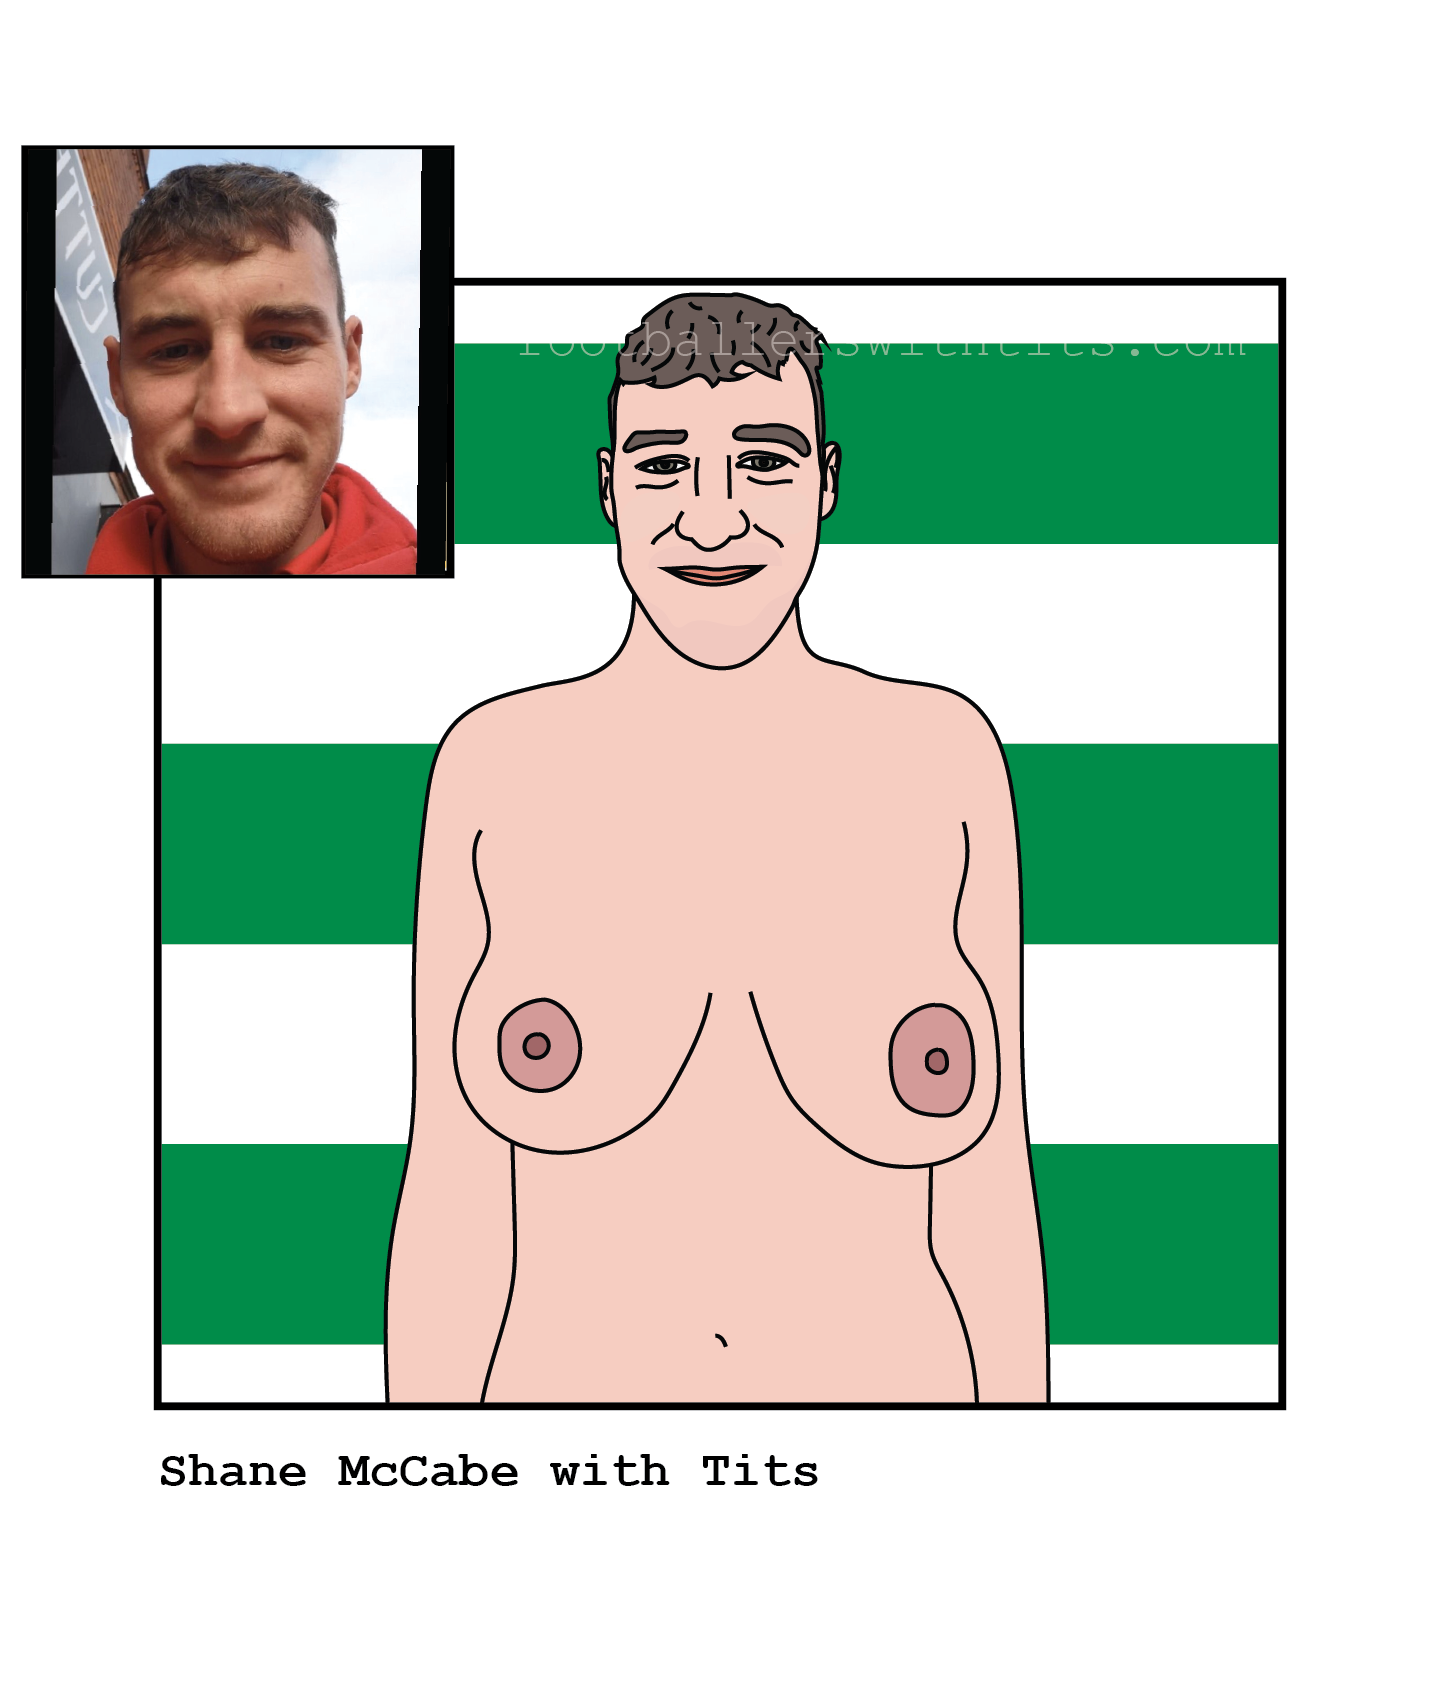 Custom Tits Illustration - Footballers with Tits